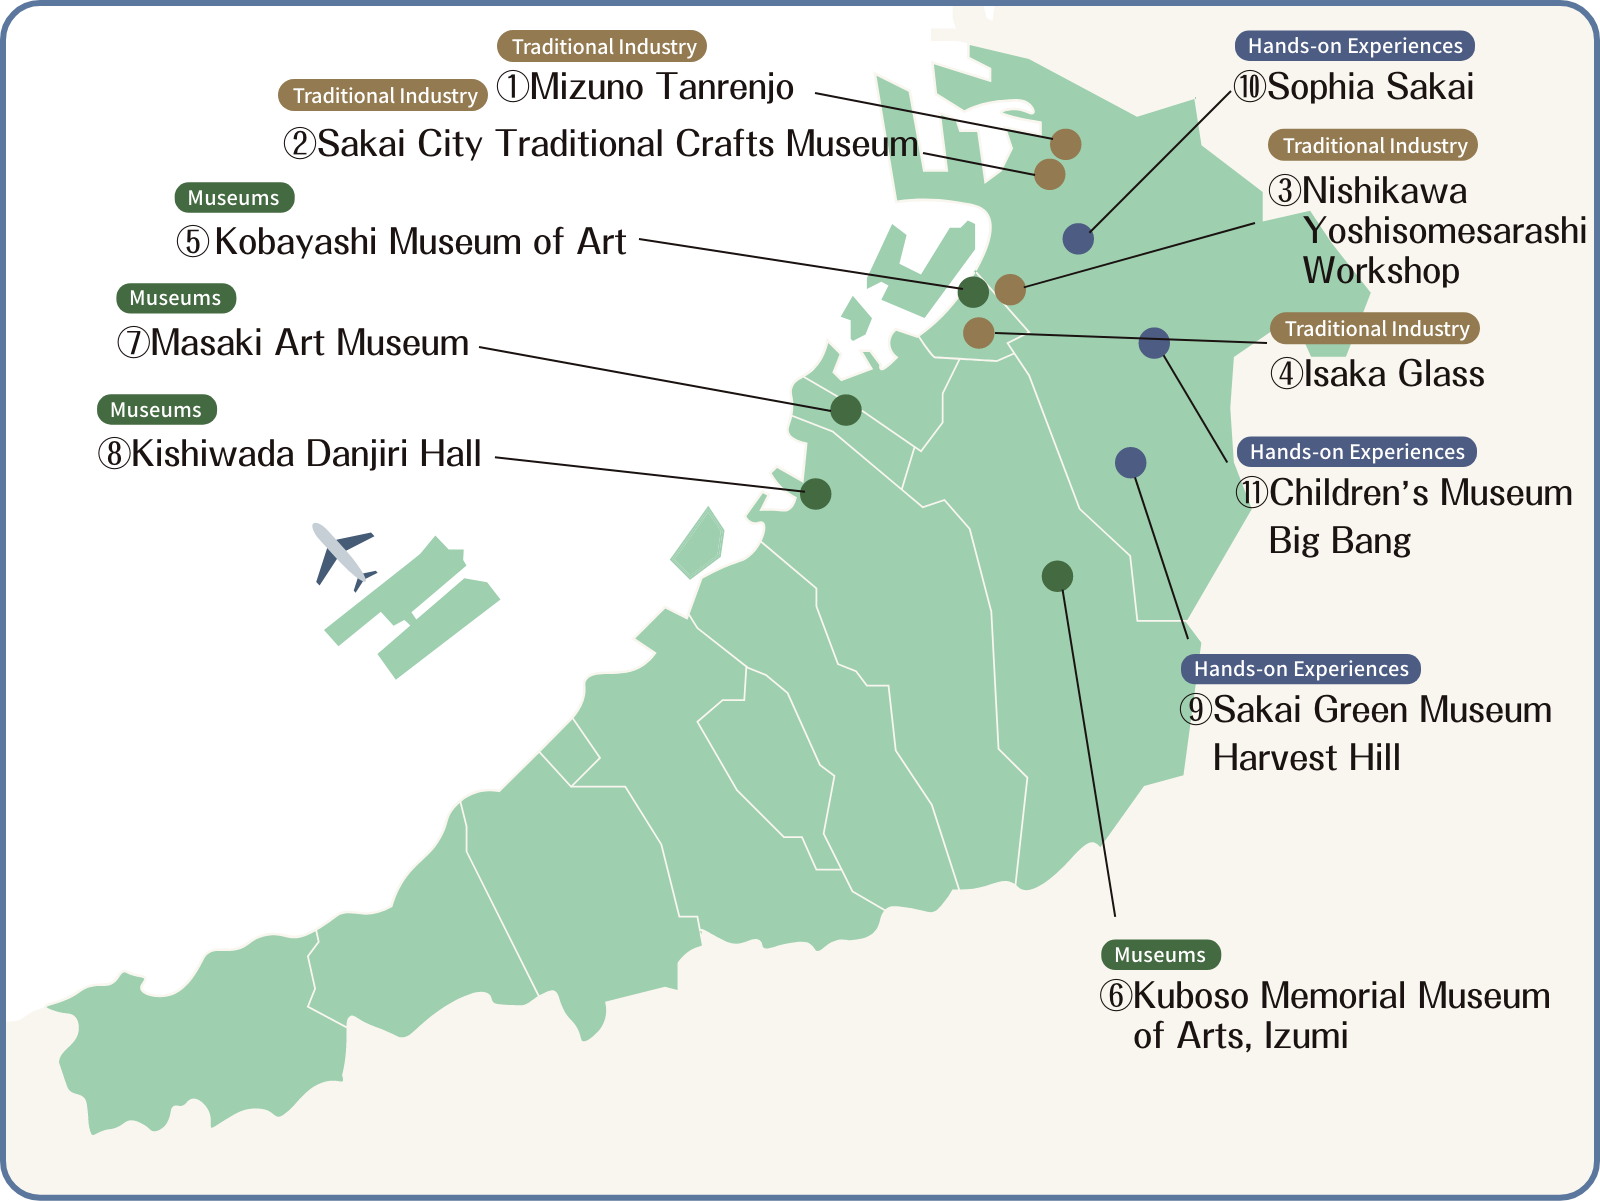 Map of Senshu Traditional Industry Facilities and Art Museums